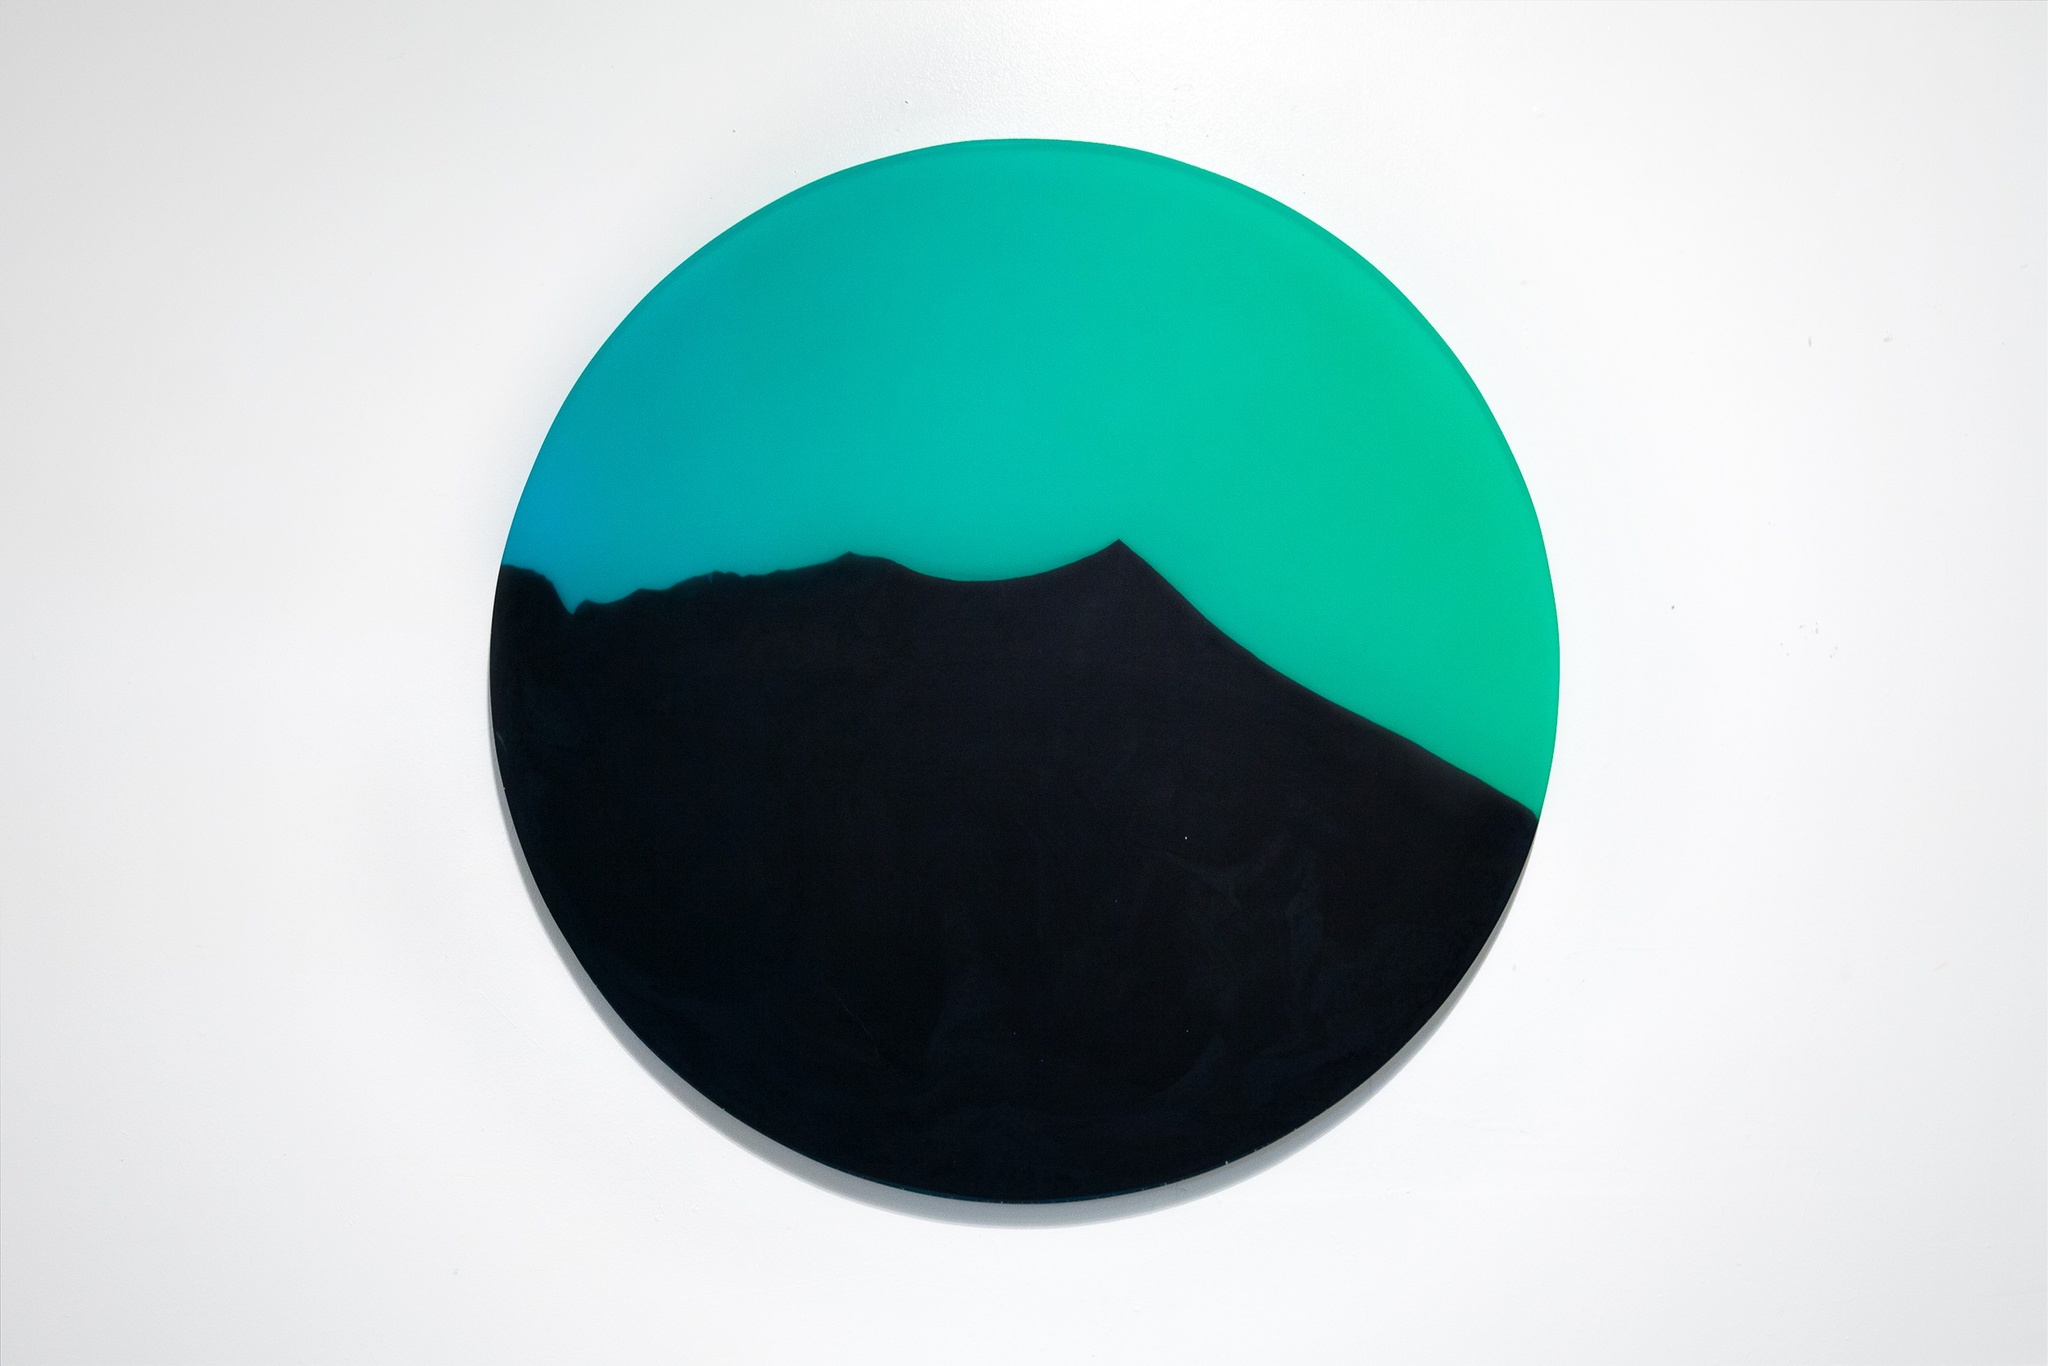 A disk sits on a white background. The top half of the disk is a mix of blue-green colors and the bottom half is defined by a black section with a jagged point that pushes into the top half of the disk, as if depicting a mountain landscape in shadow against a blue-green sky.